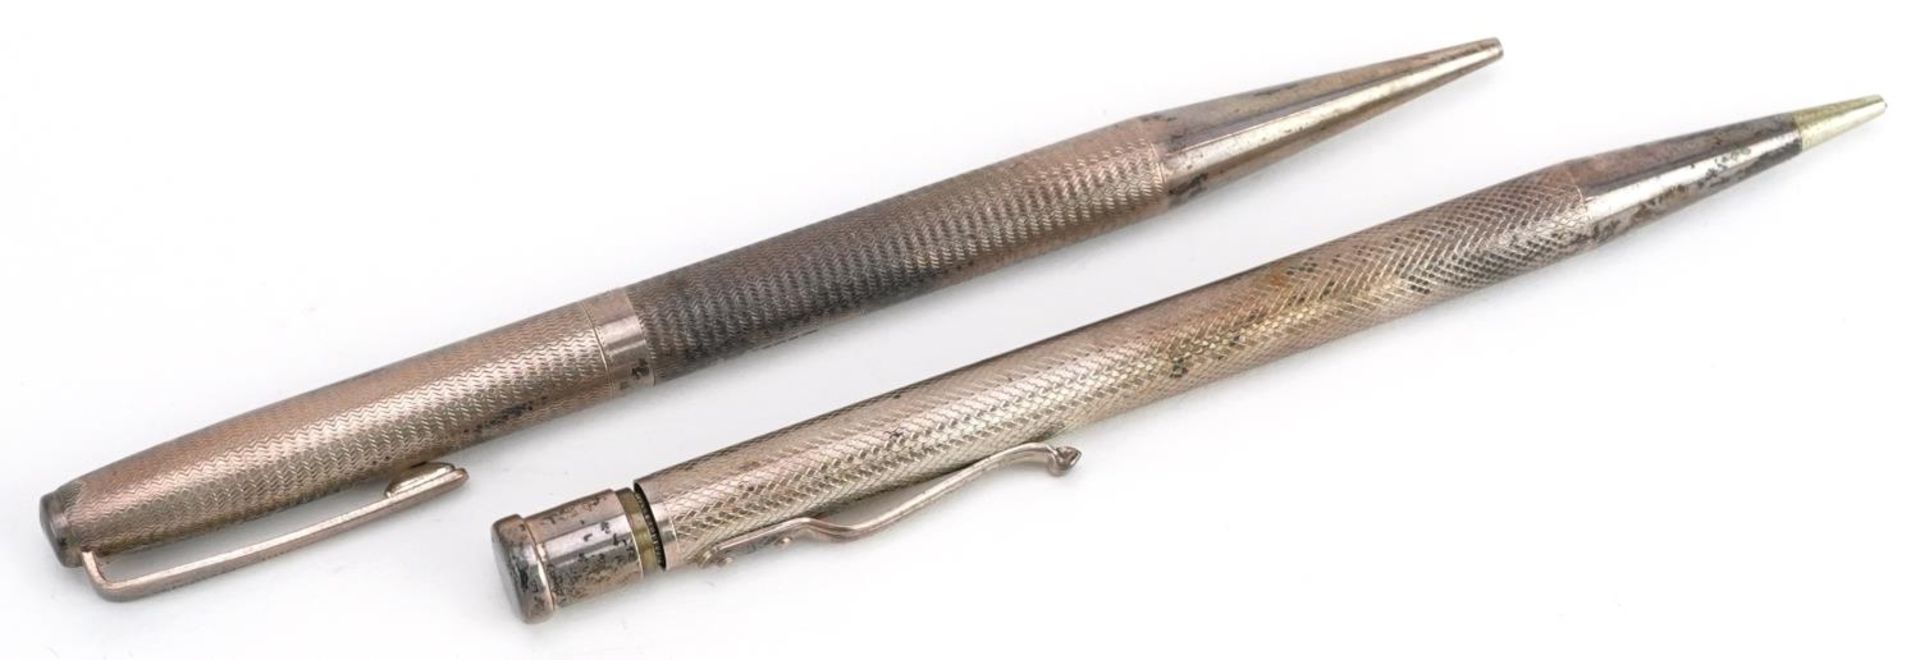 Two Yard-O-Led silver propelling pencils with fitted cases : For further information on this lot - Image 4 of 5